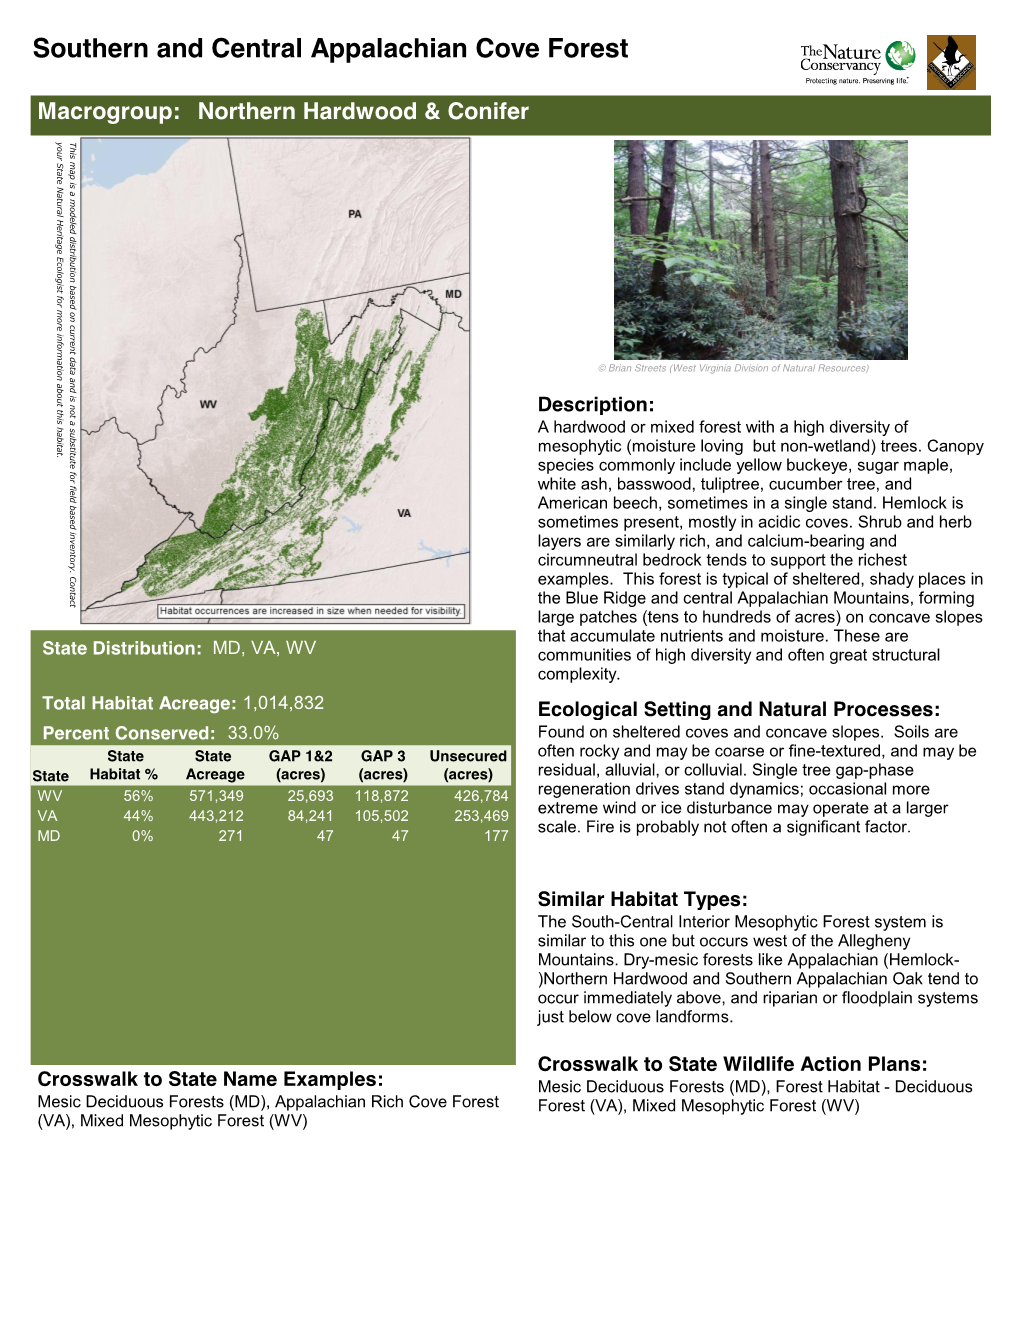 Southern and Central Appalachian Cove Forest